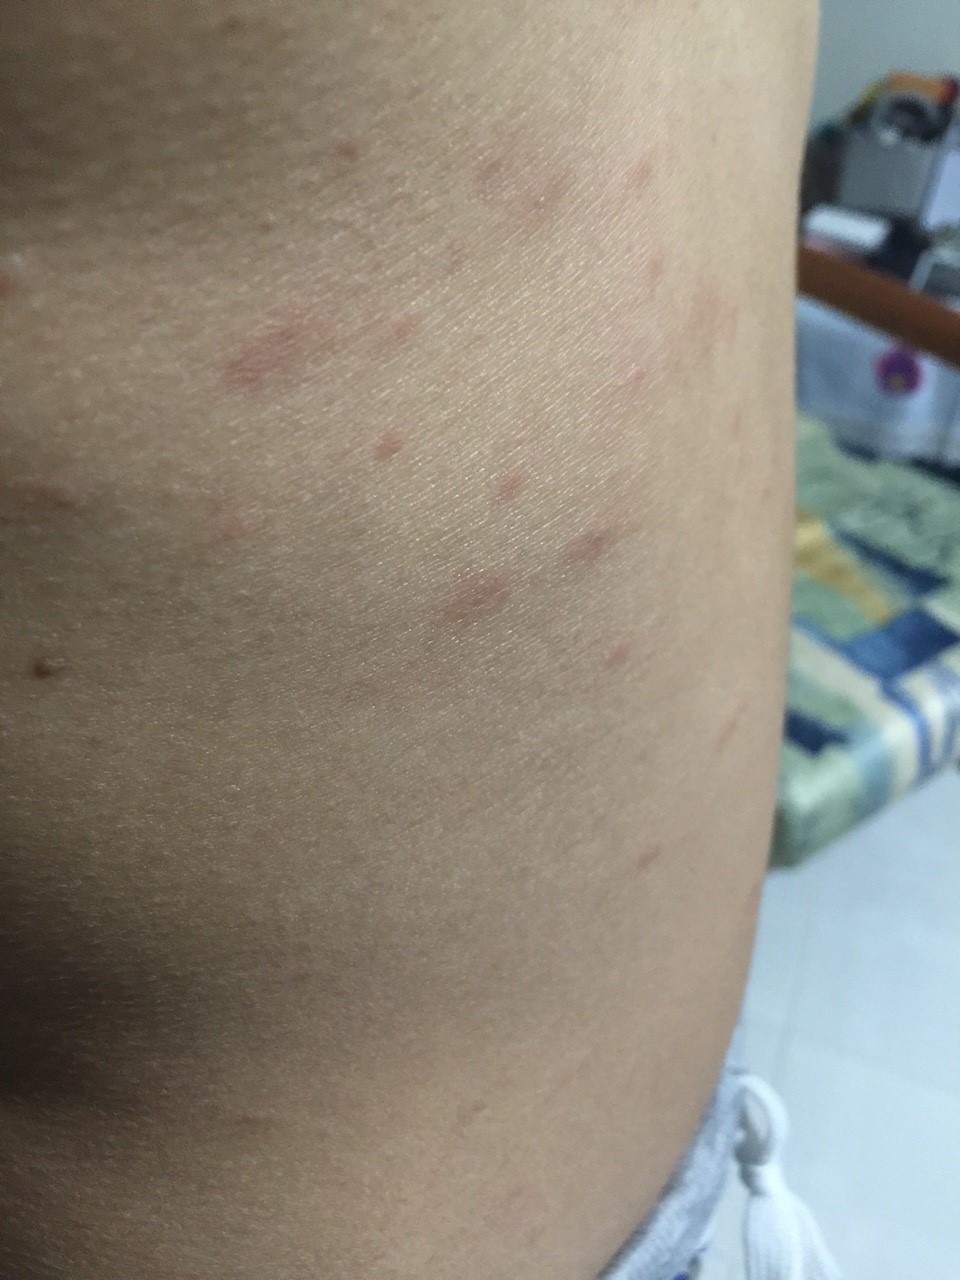 What Could Be The Cause Of Non Itchy Red Rashes On My Torso Photos